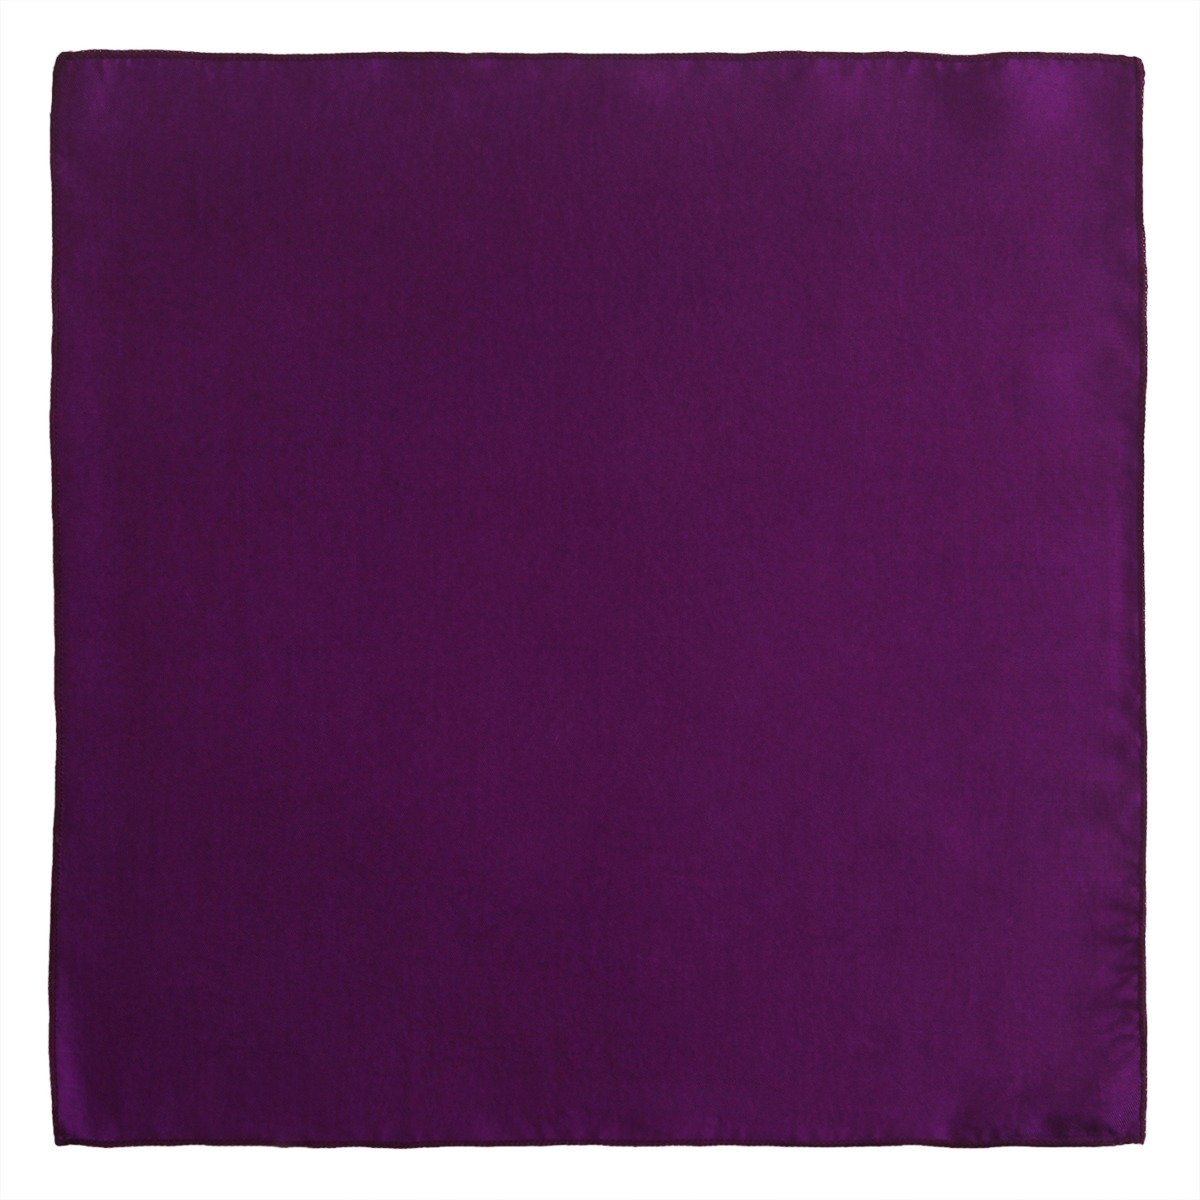 Chokore Deep Purple Pure Silk Pocket Square, from the Solids Line